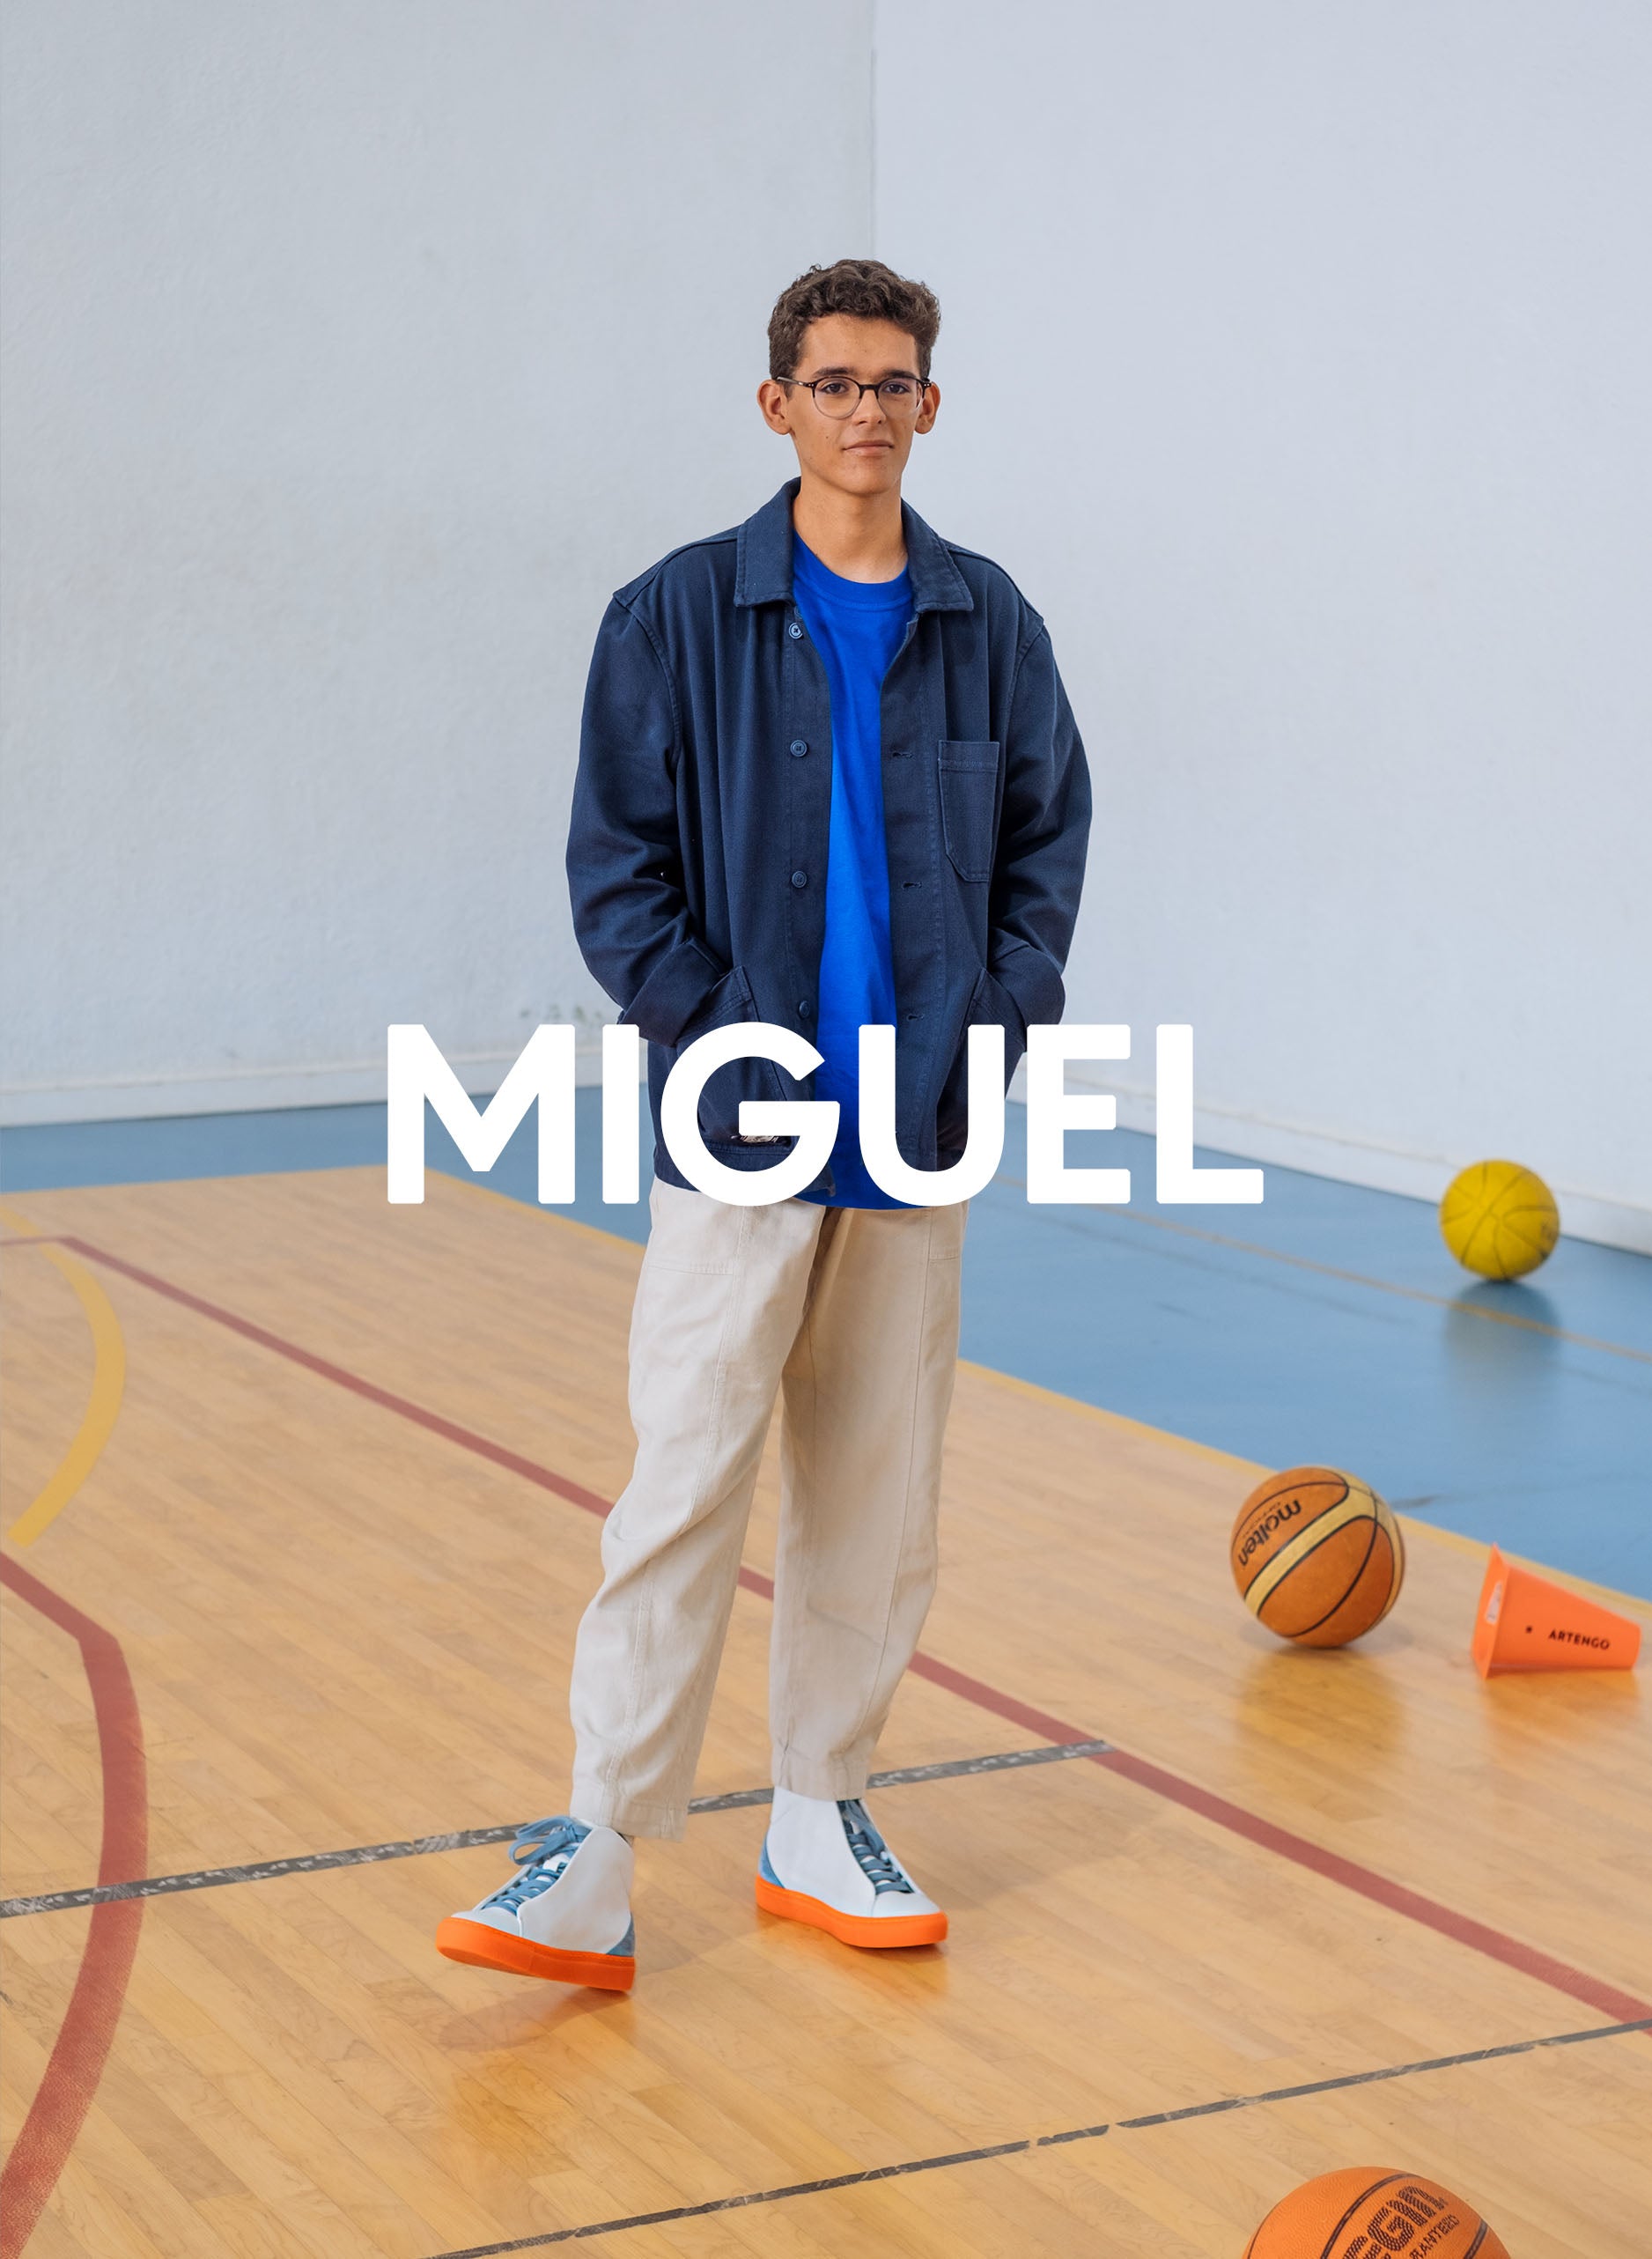 Miguel in a gym wearing a blue jacket, beige pants and also diverge sneakers, promoting social impact and custom shoes throught the imagine project.